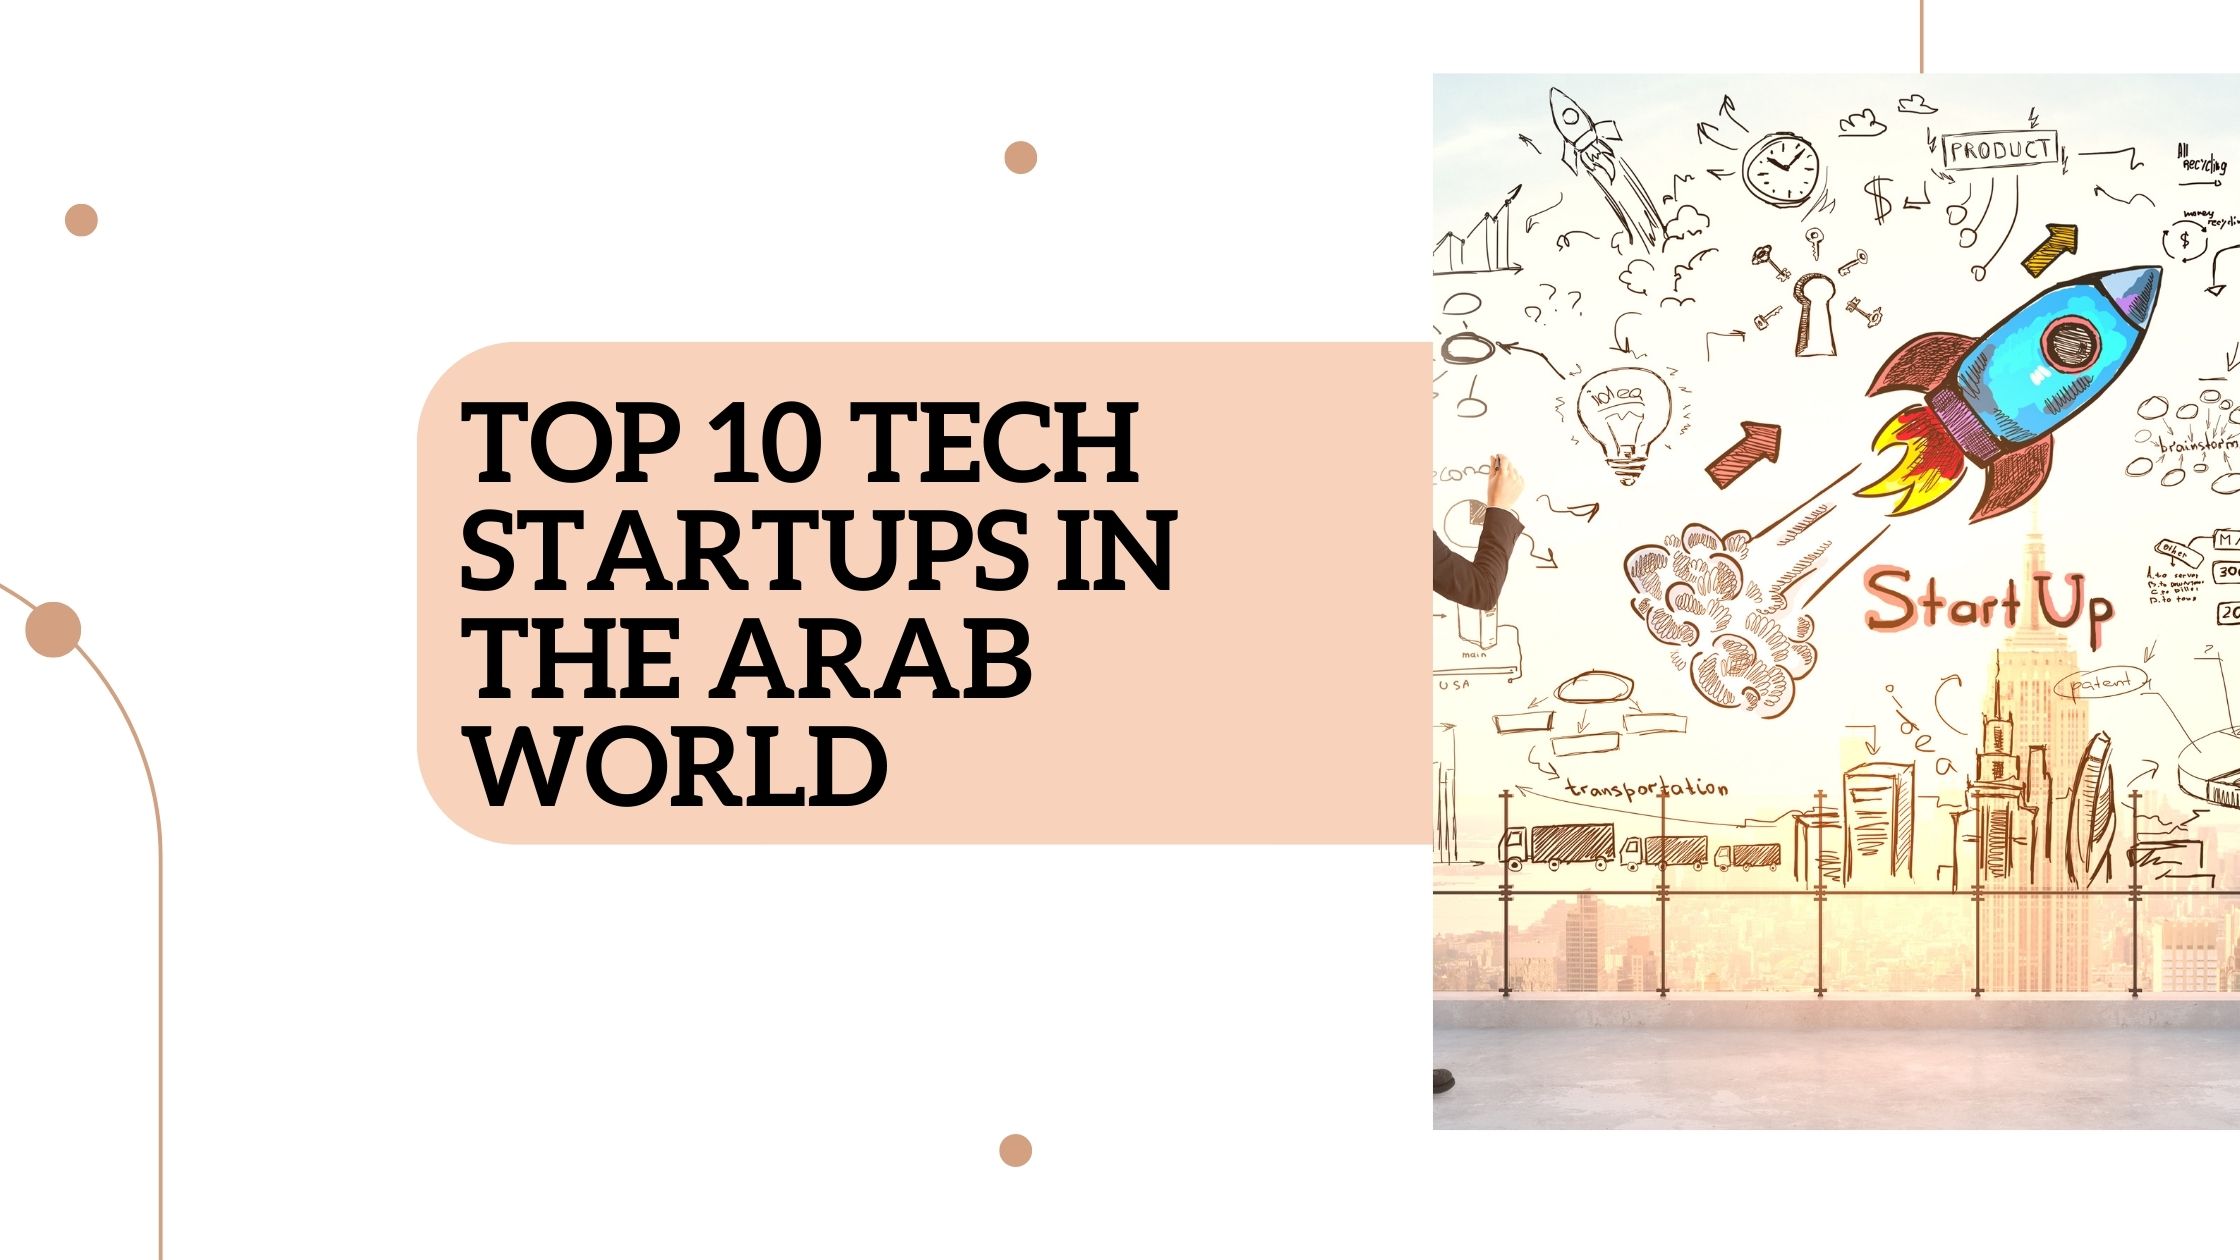 Top 10 Tech Startups in the Arab World